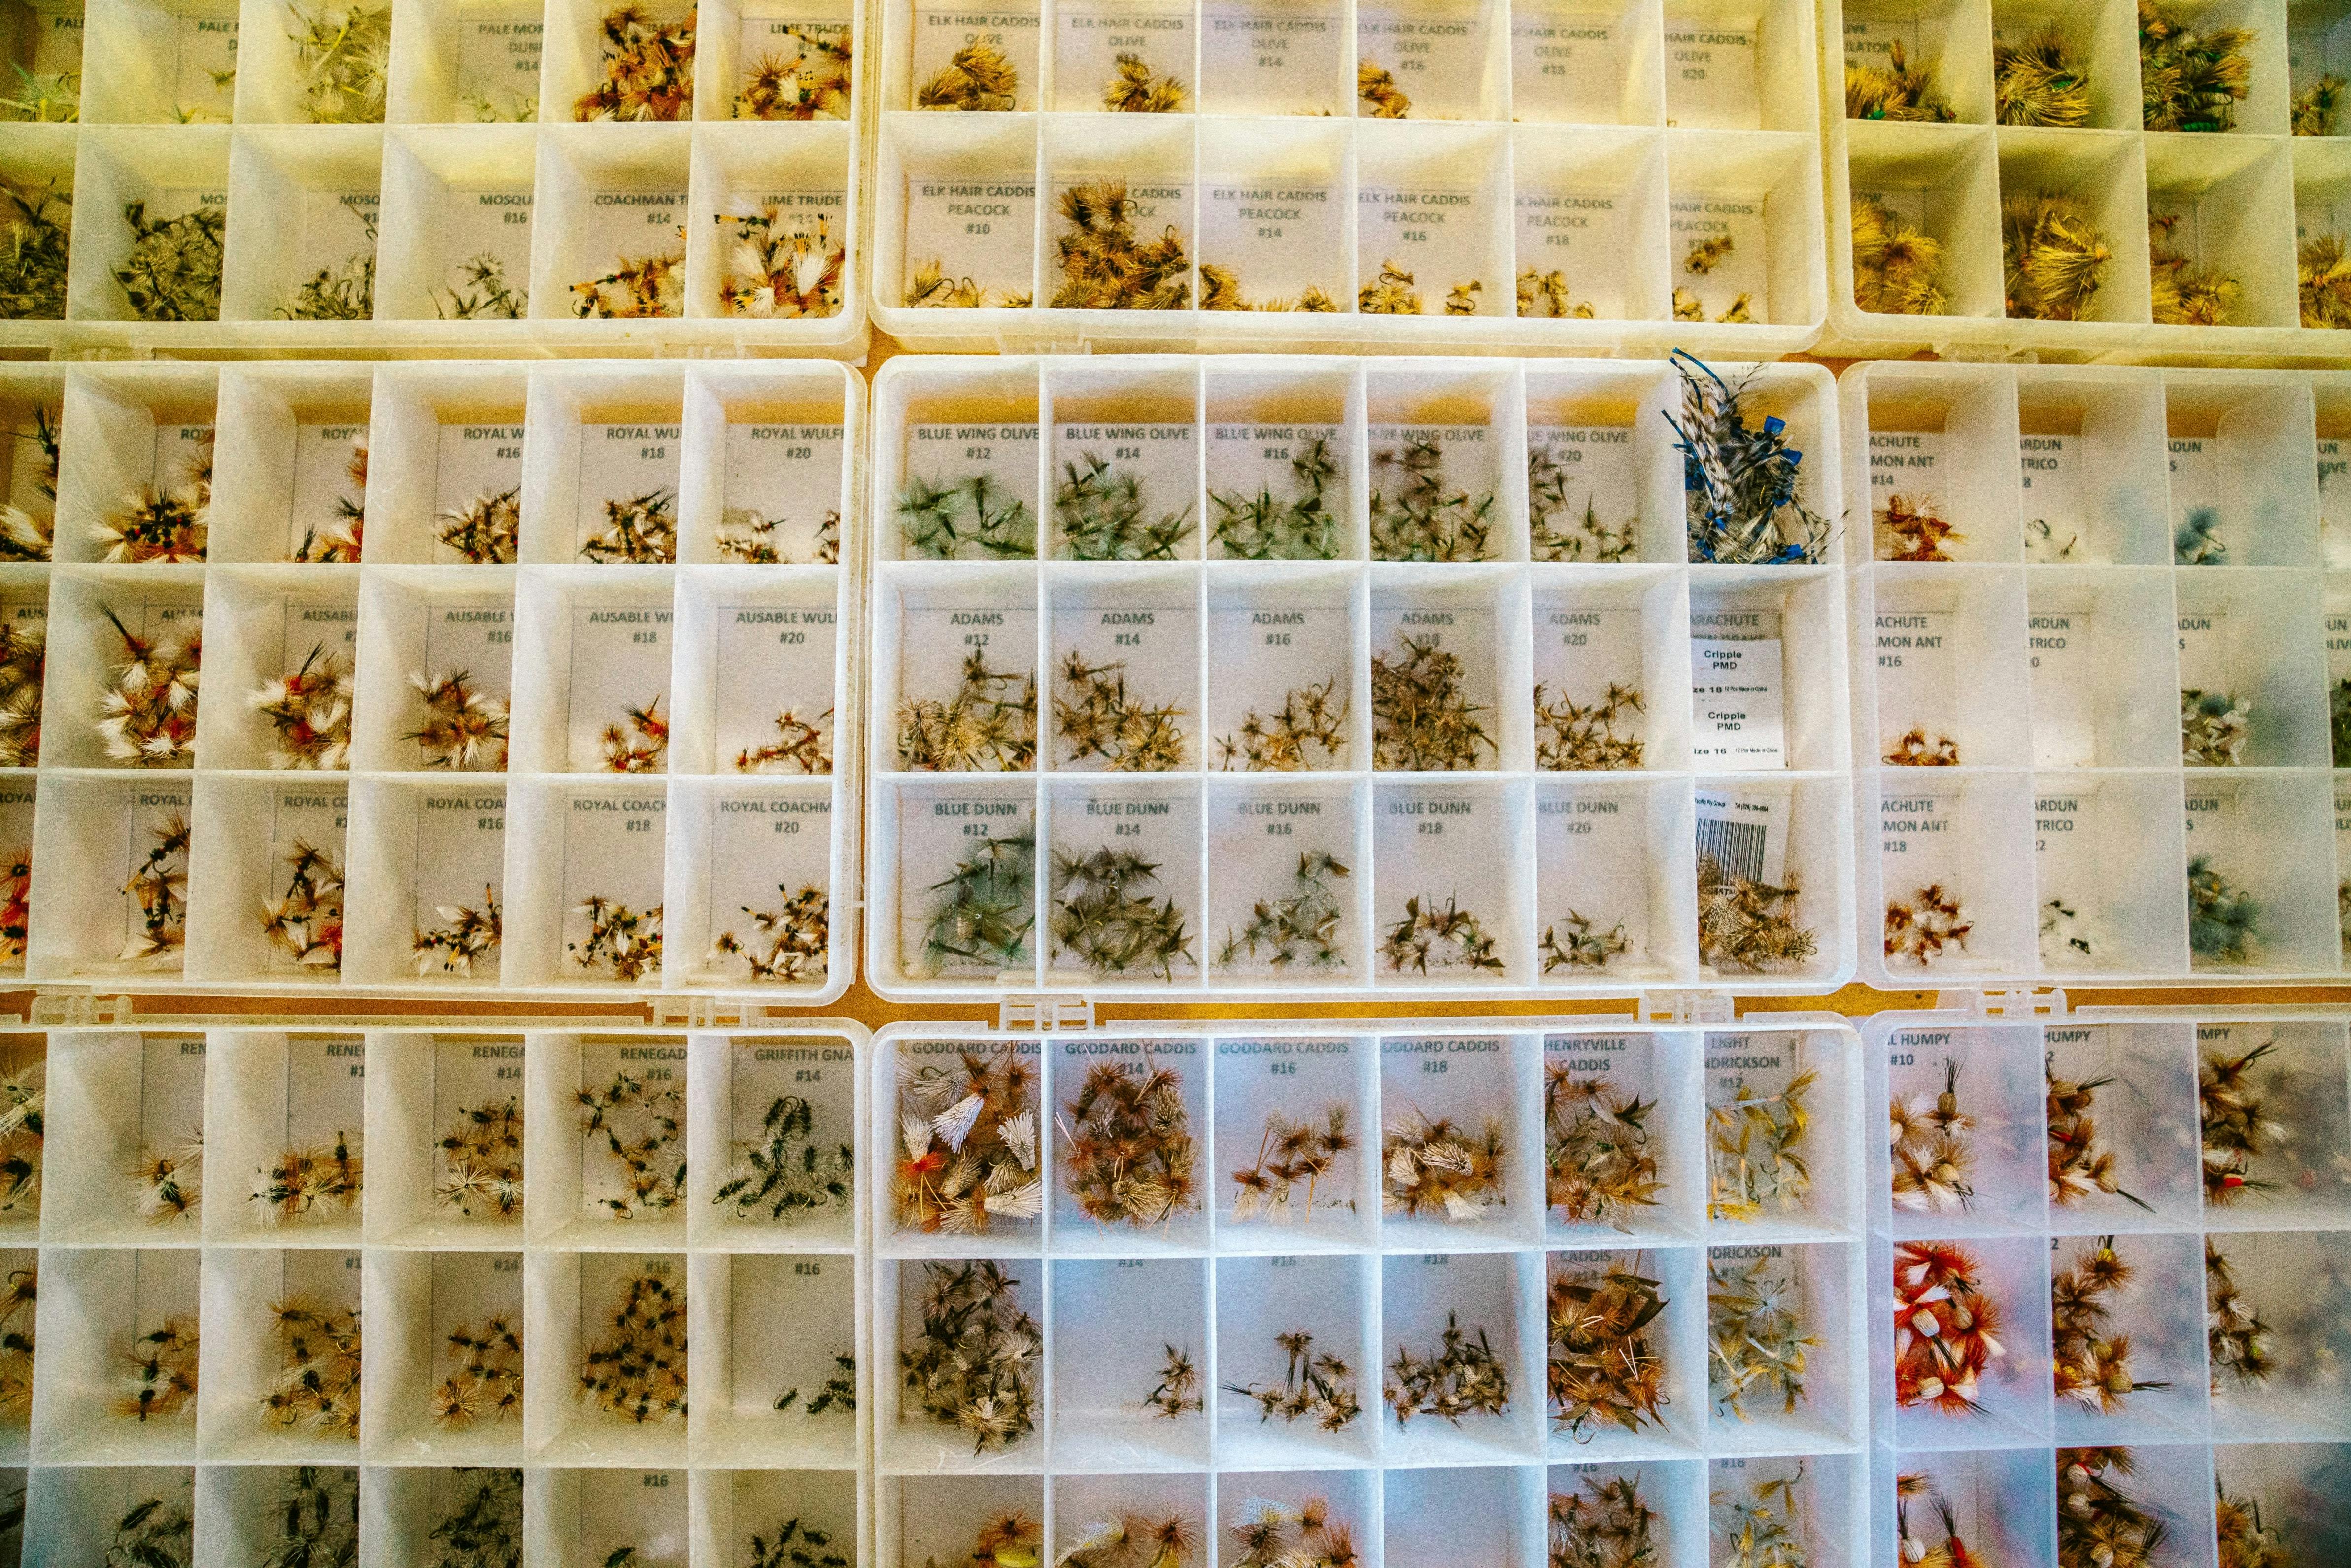 A wall of cubbyholes filled with different types of flies